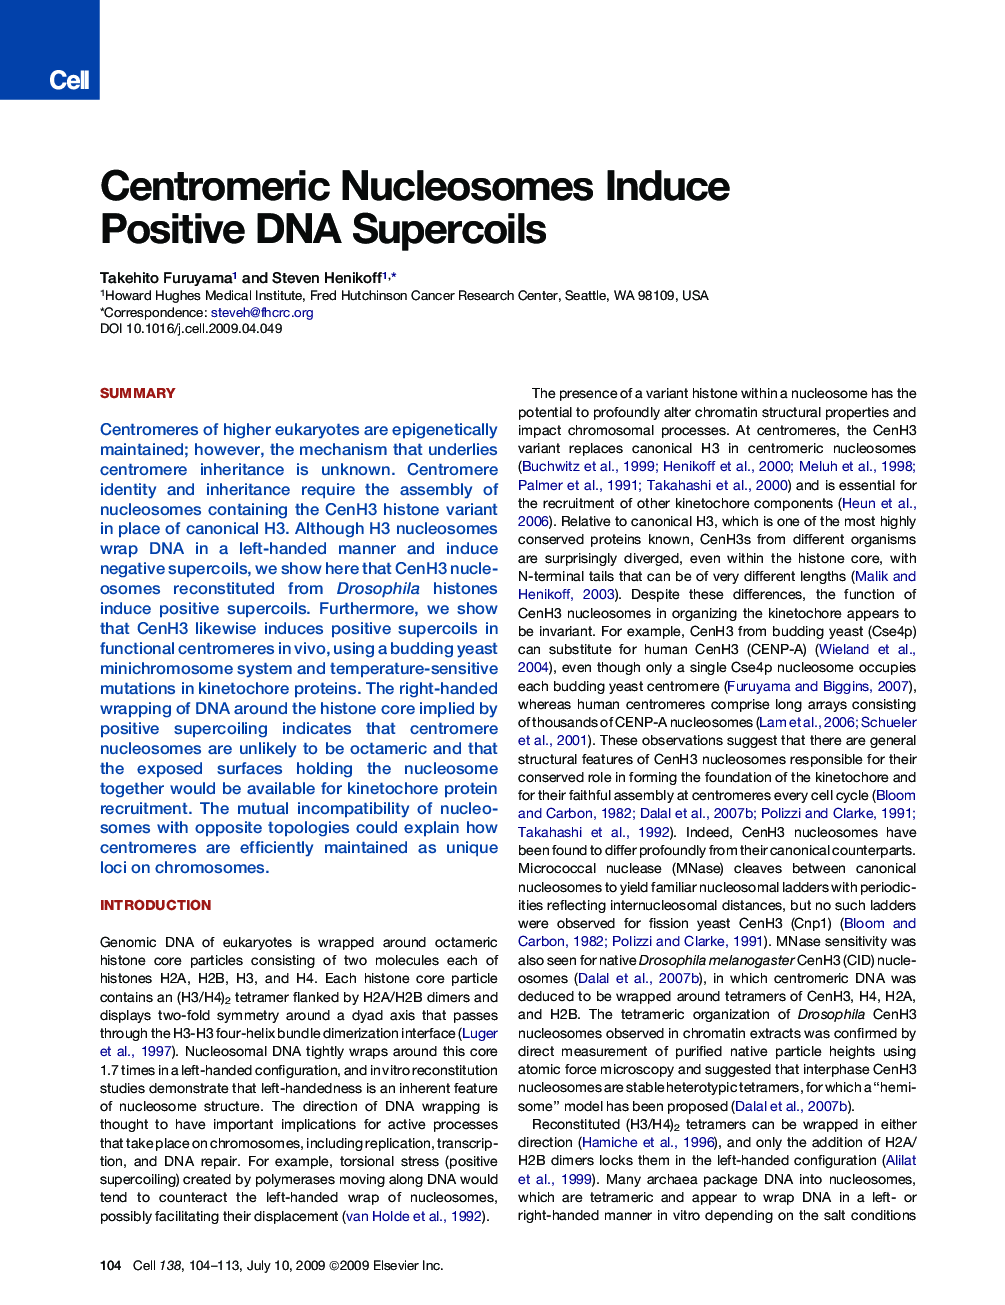 Centromeric Nucleosomes Induce Positive DNA Supercoils